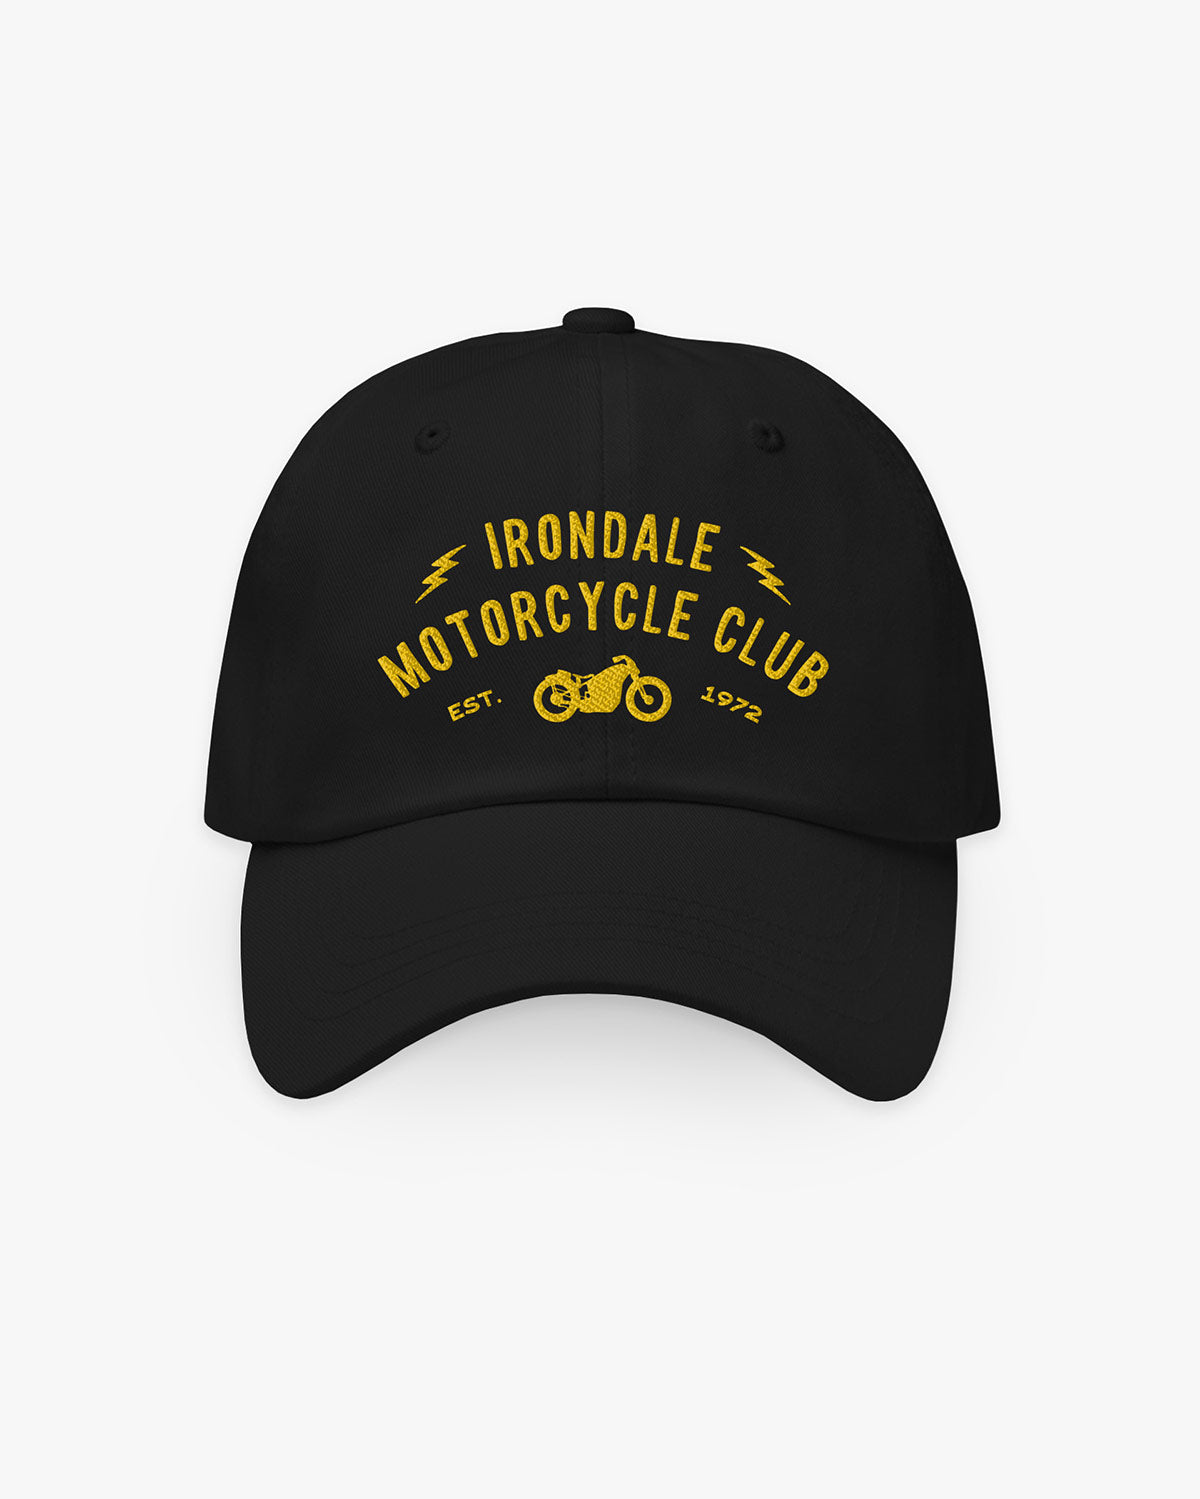 Motorcycle Club - Irondale - Hat